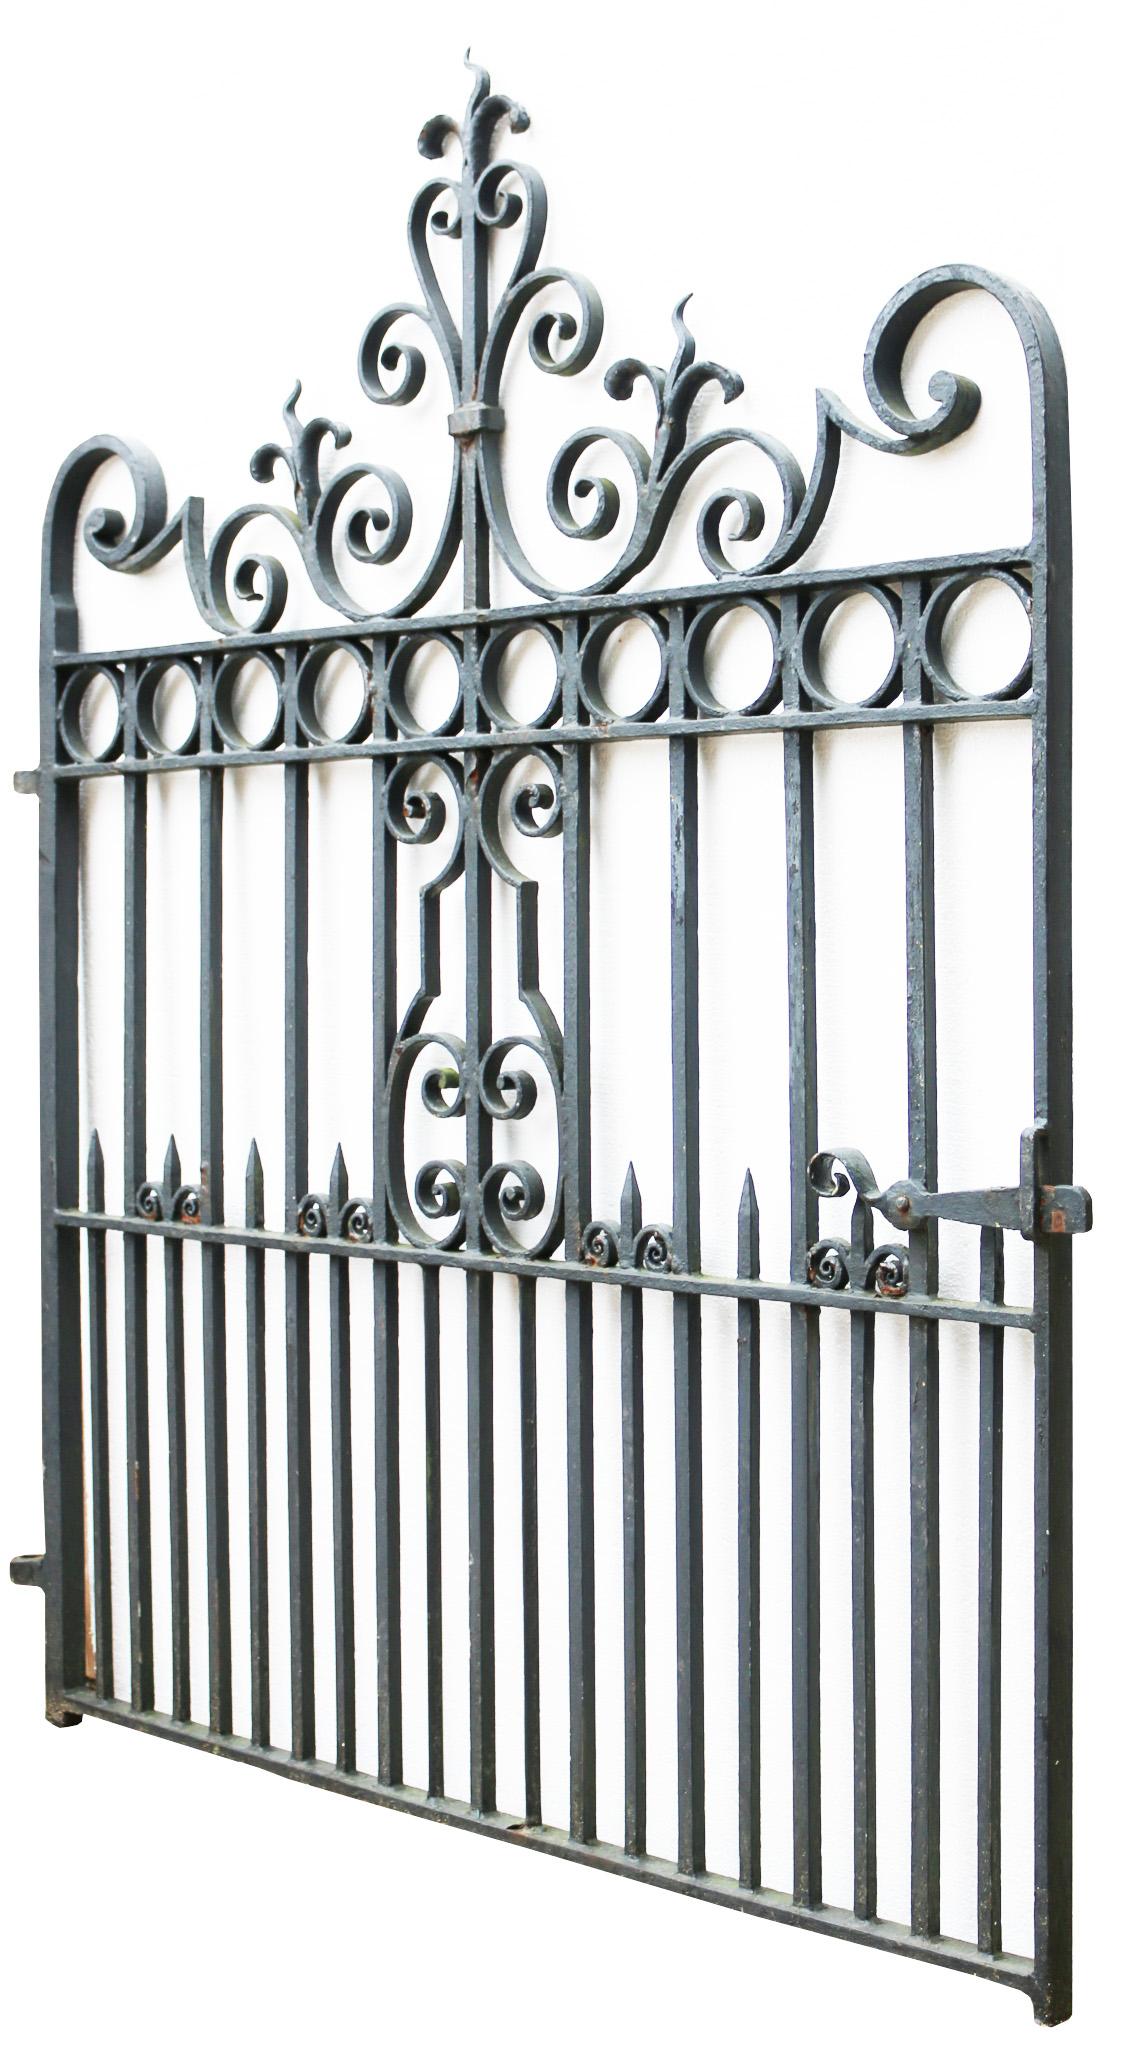 About

This gate has been handcrafted by a blacksmith. 

Features faded old back paint with a working latch. English

Condition report:

Minor corrosion with flaking old paint otherwise in good condition for its age. 

Style: